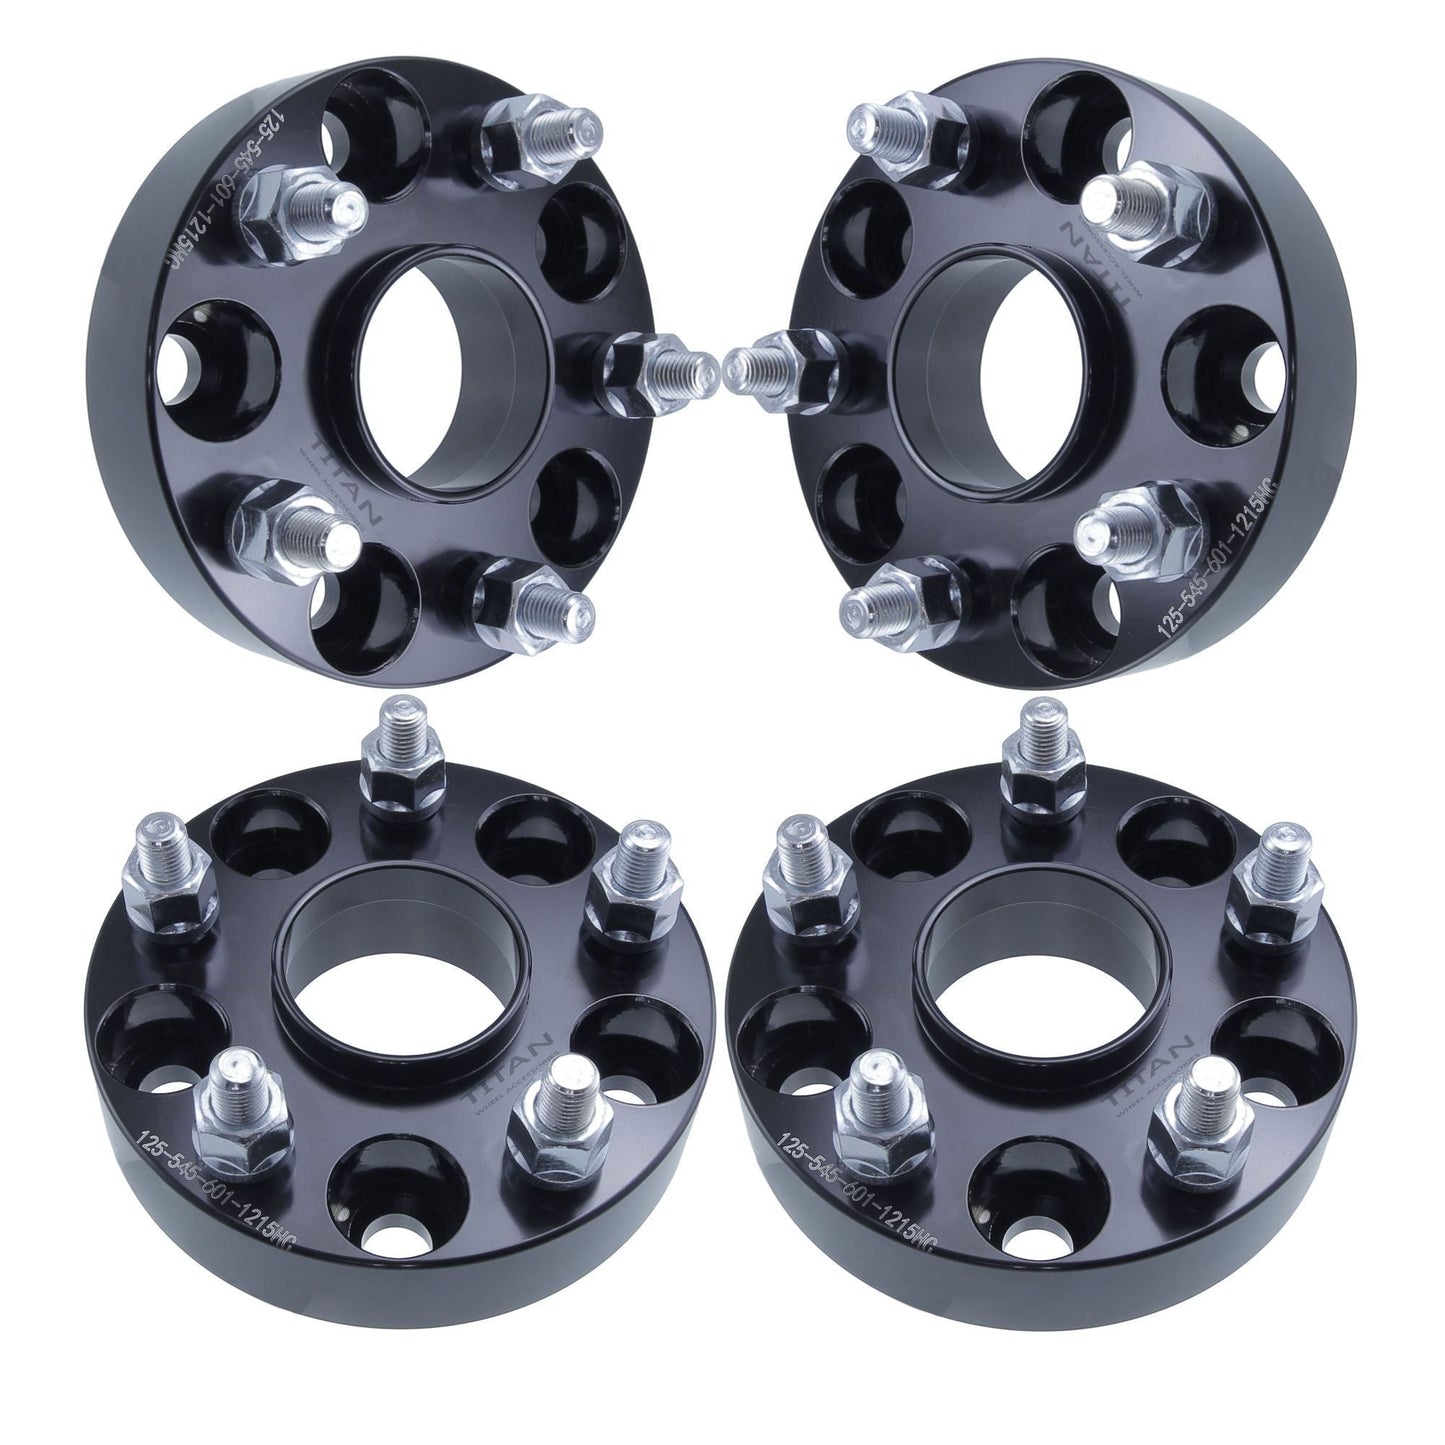 32mm (1.25") Titan Wheel Spacers for Toyota Camry MR2 Supra Lexus IS | 5x114.3 (5x4.5) | 60.1 Hubcentric |12x1.5 Studs |  Set of 4 | Titan Wheel Accessories